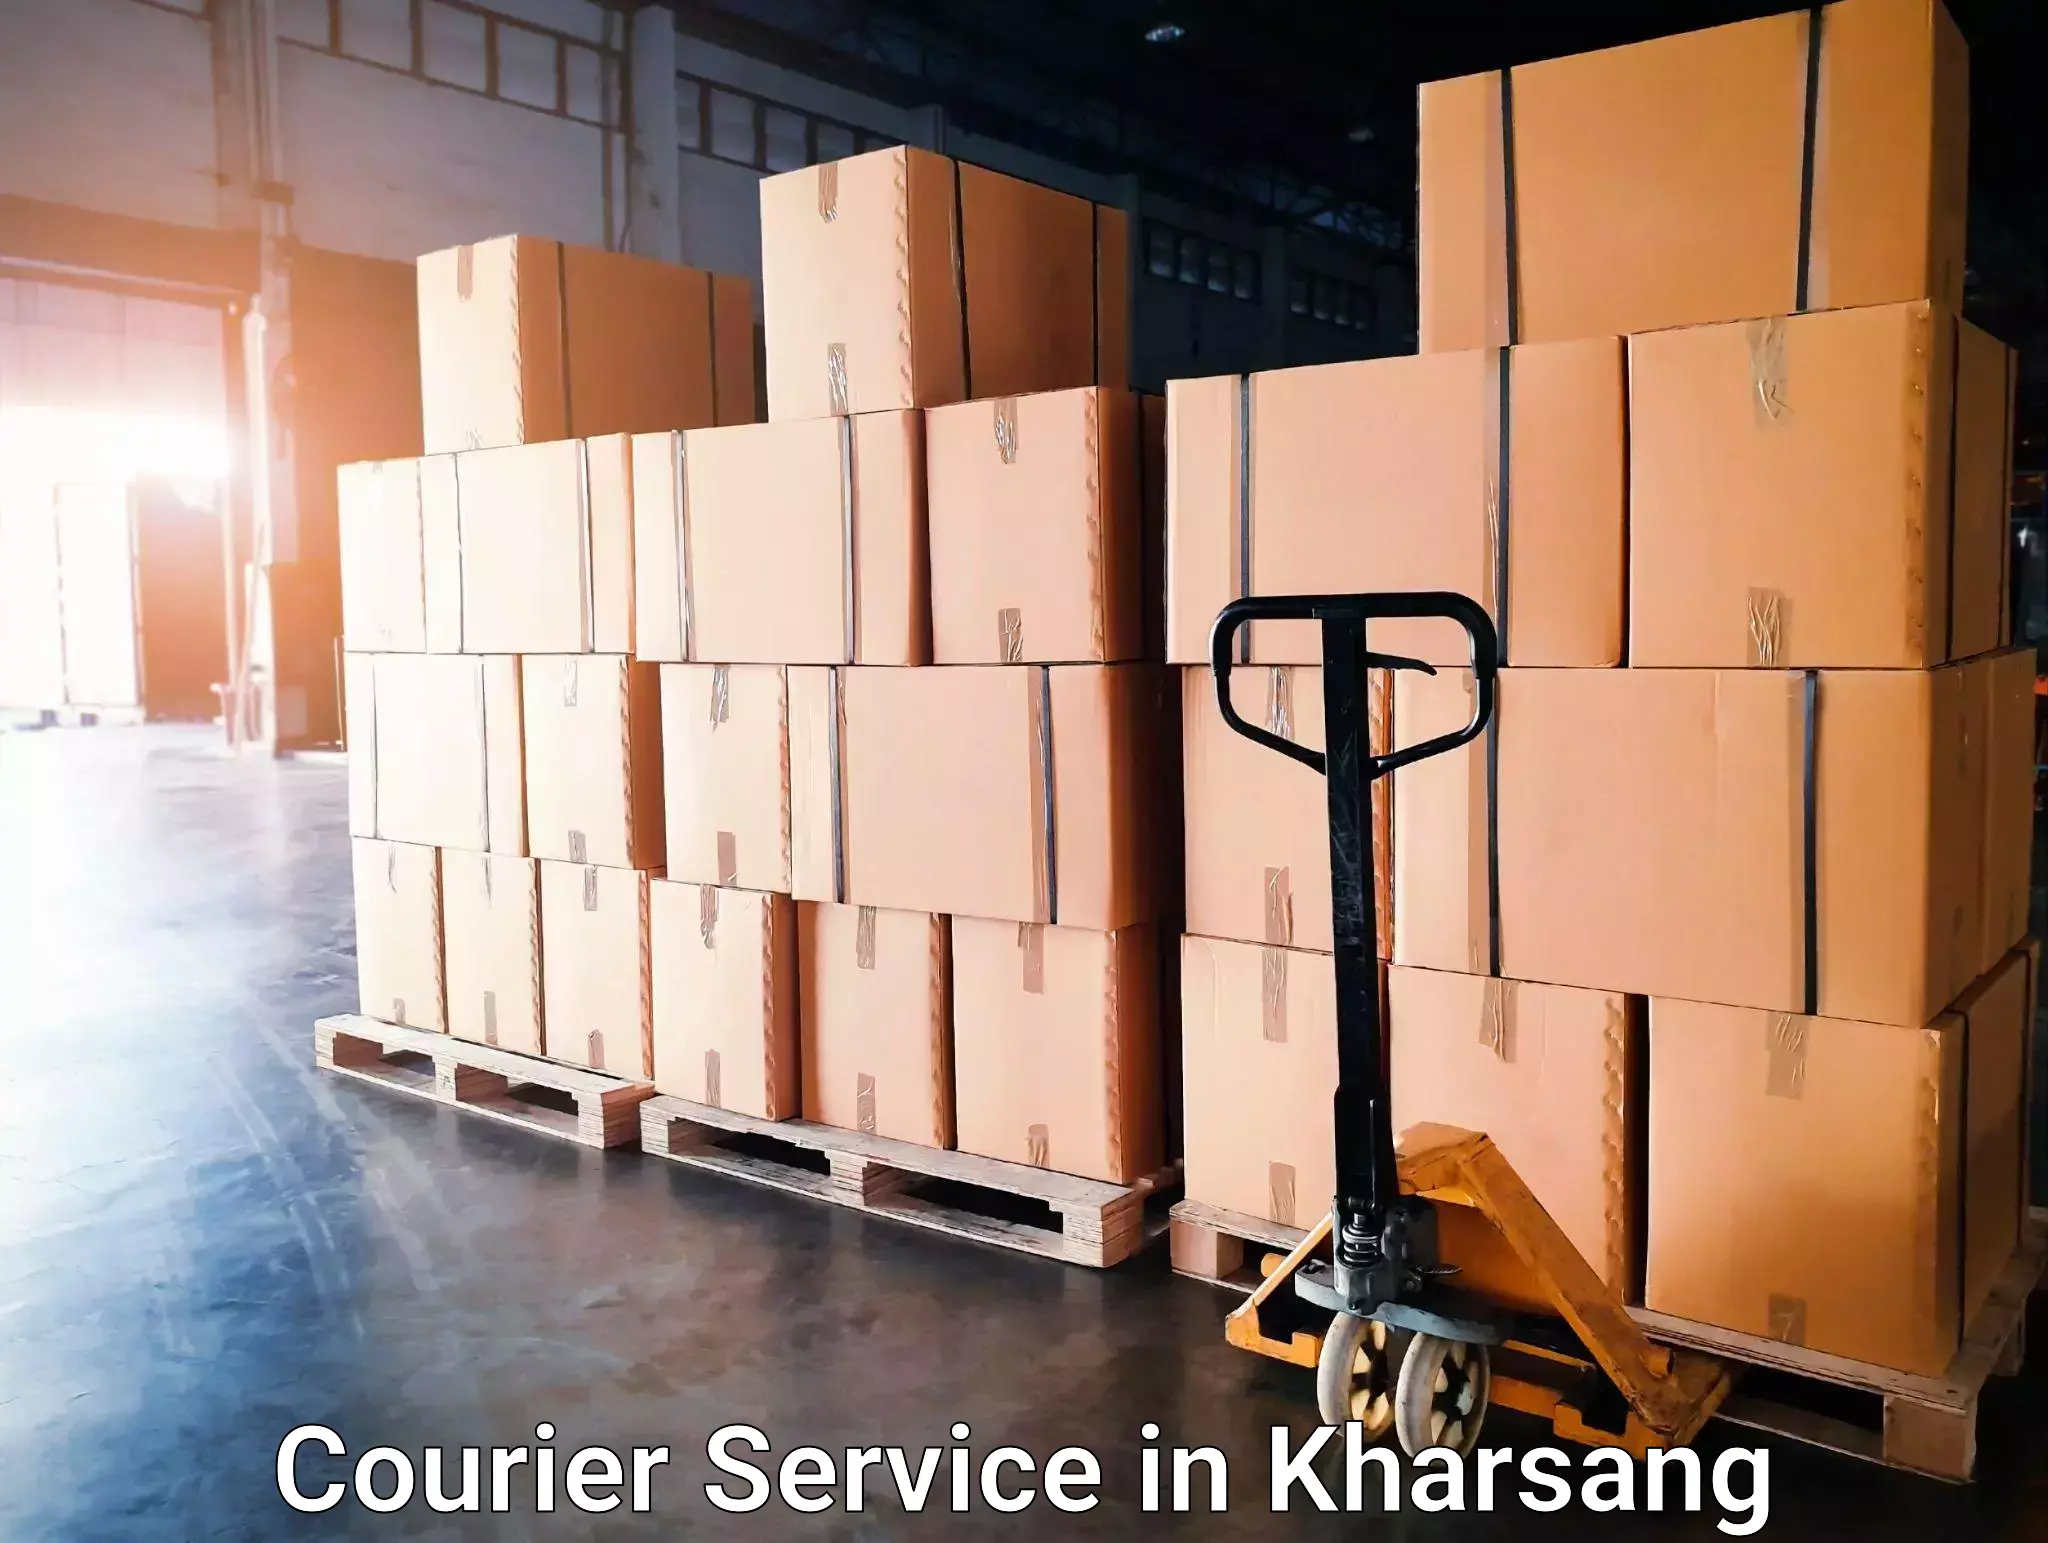 Seamless shipping experience in Kharsang